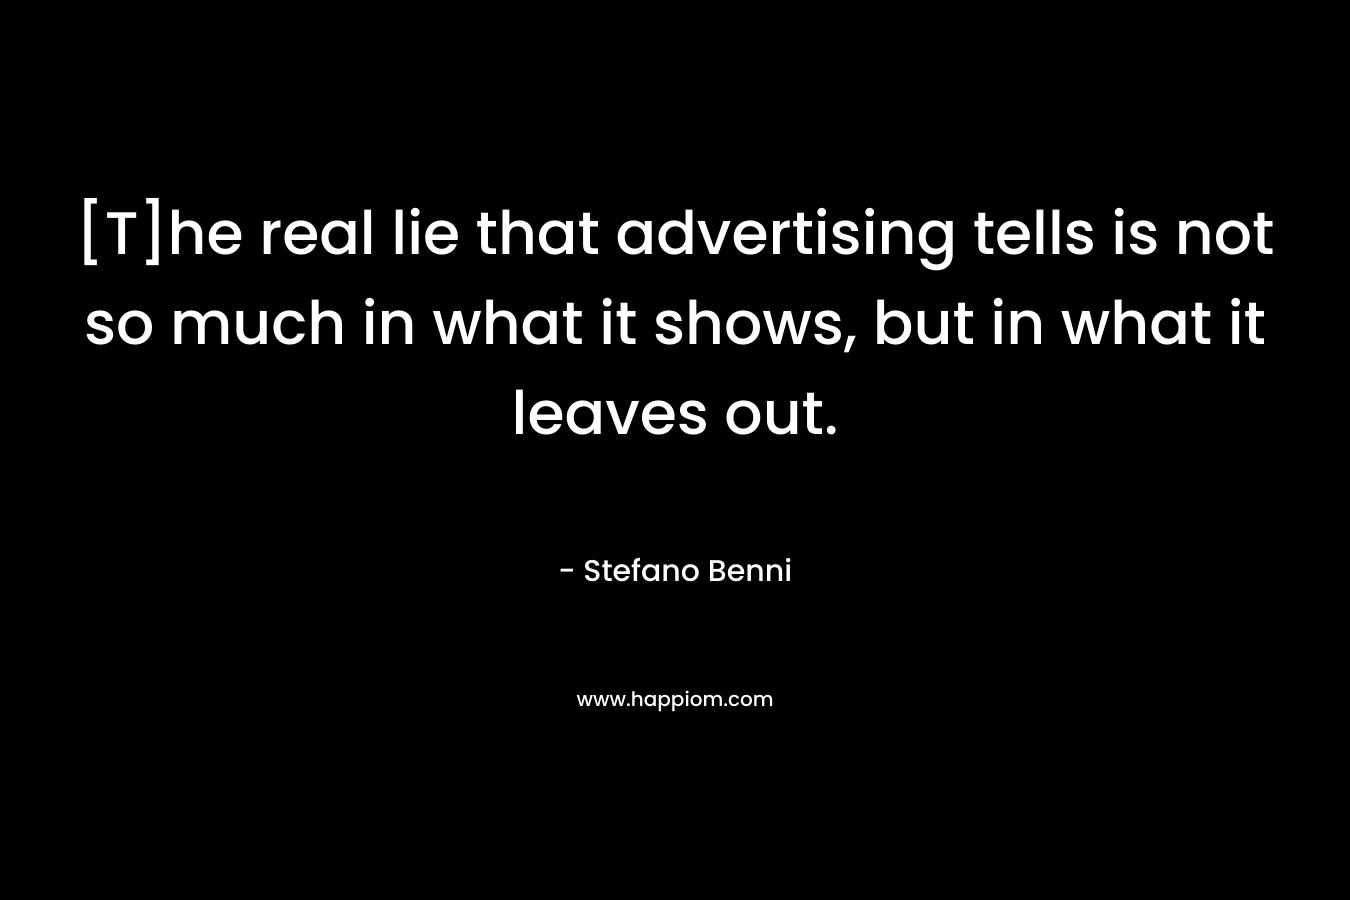 [T]he real lie that advertising tells is not so much in what it shows, but in what it leaves out.